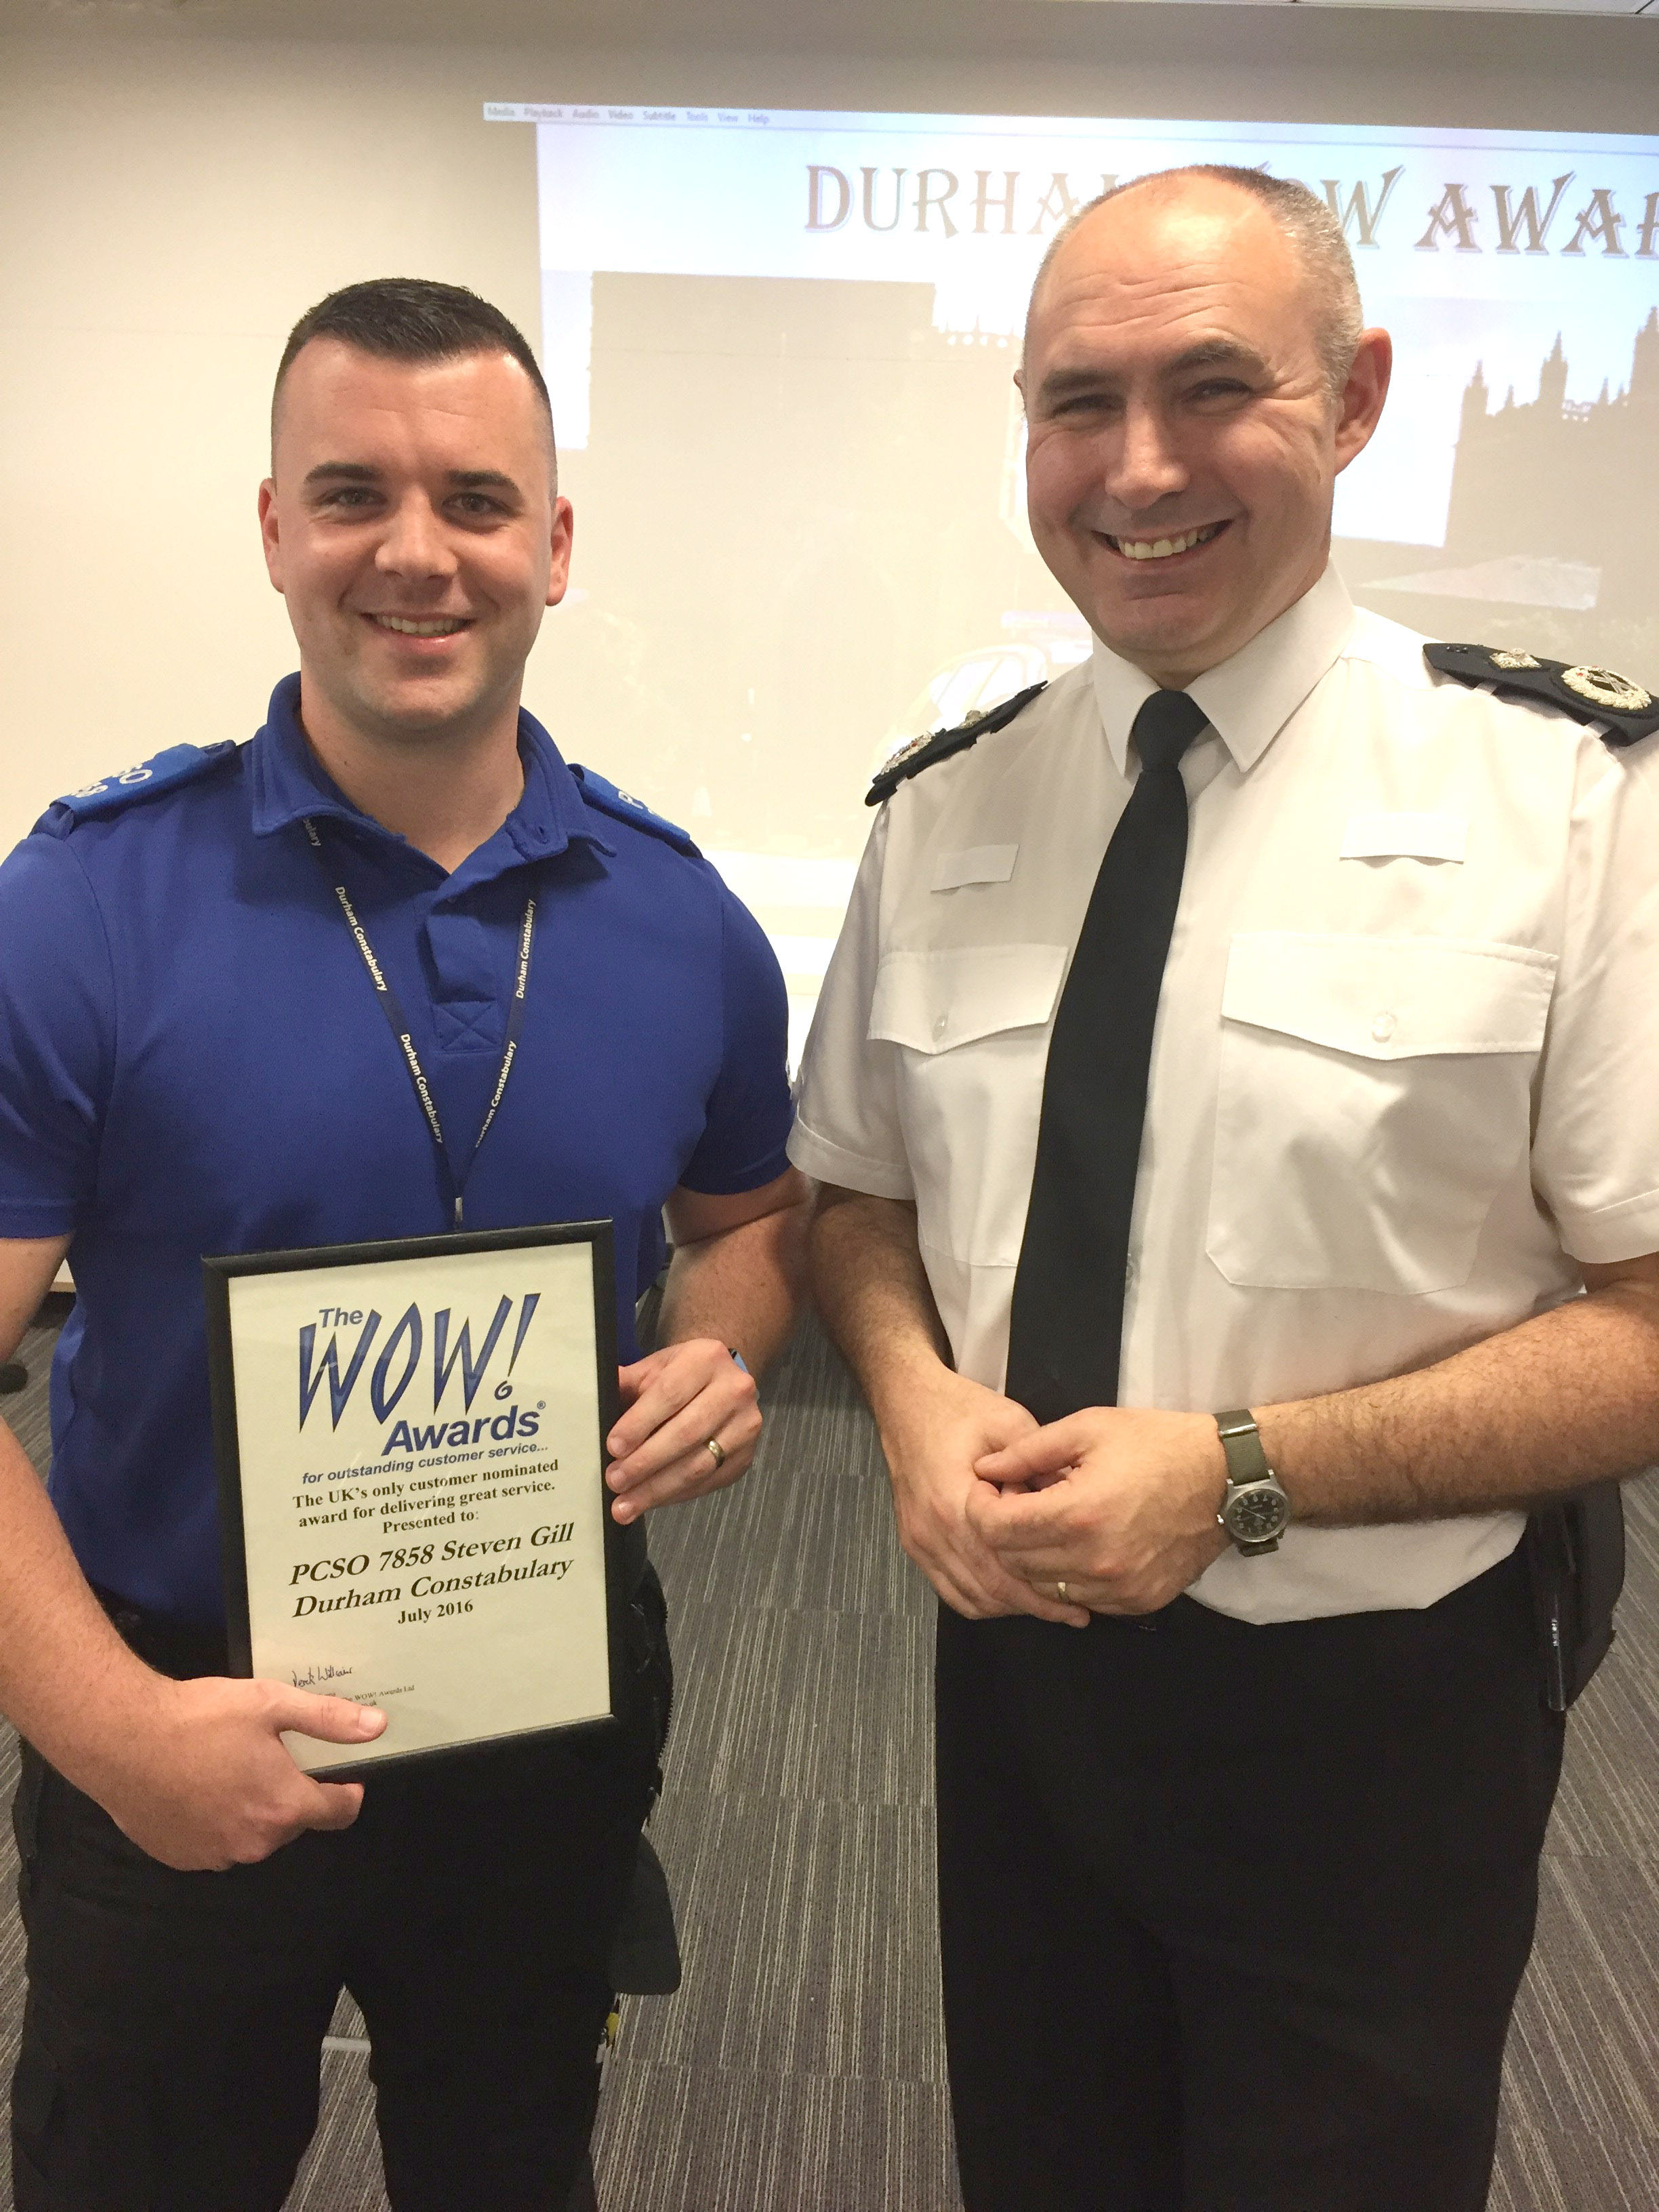 Aycliffe PCSO’s Receive “WOW” Awards